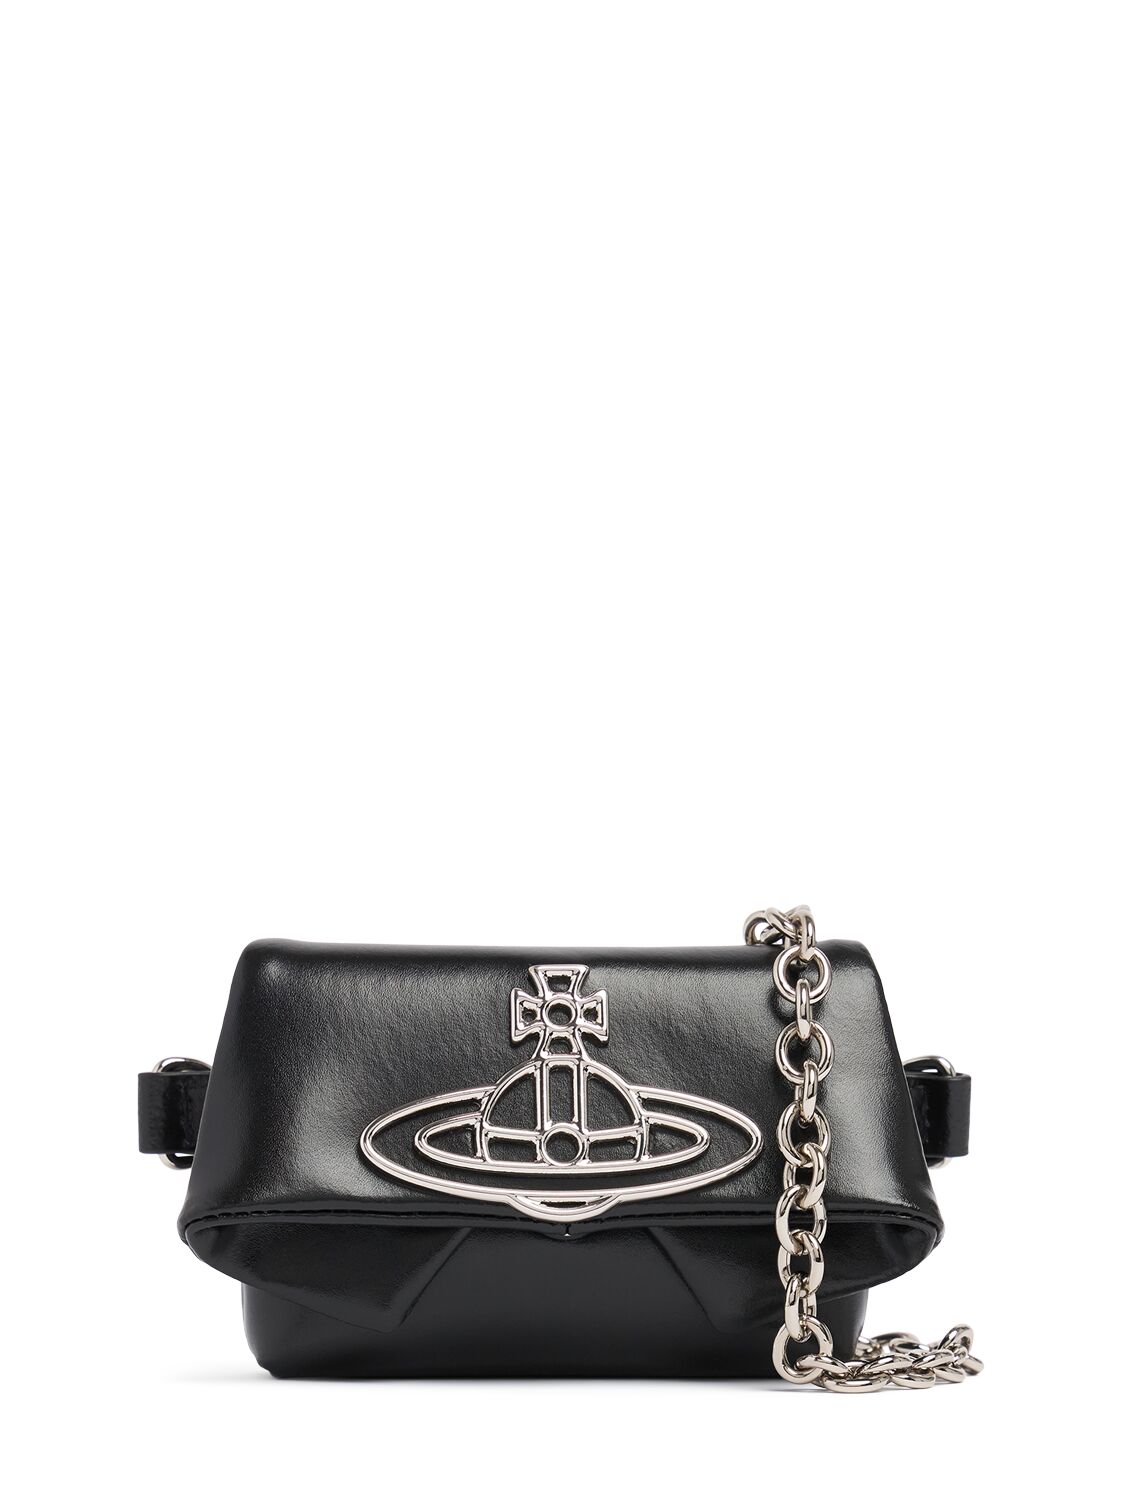 Vivienne Westwood Mini Courtney Chain Silky Leather Bag In Black